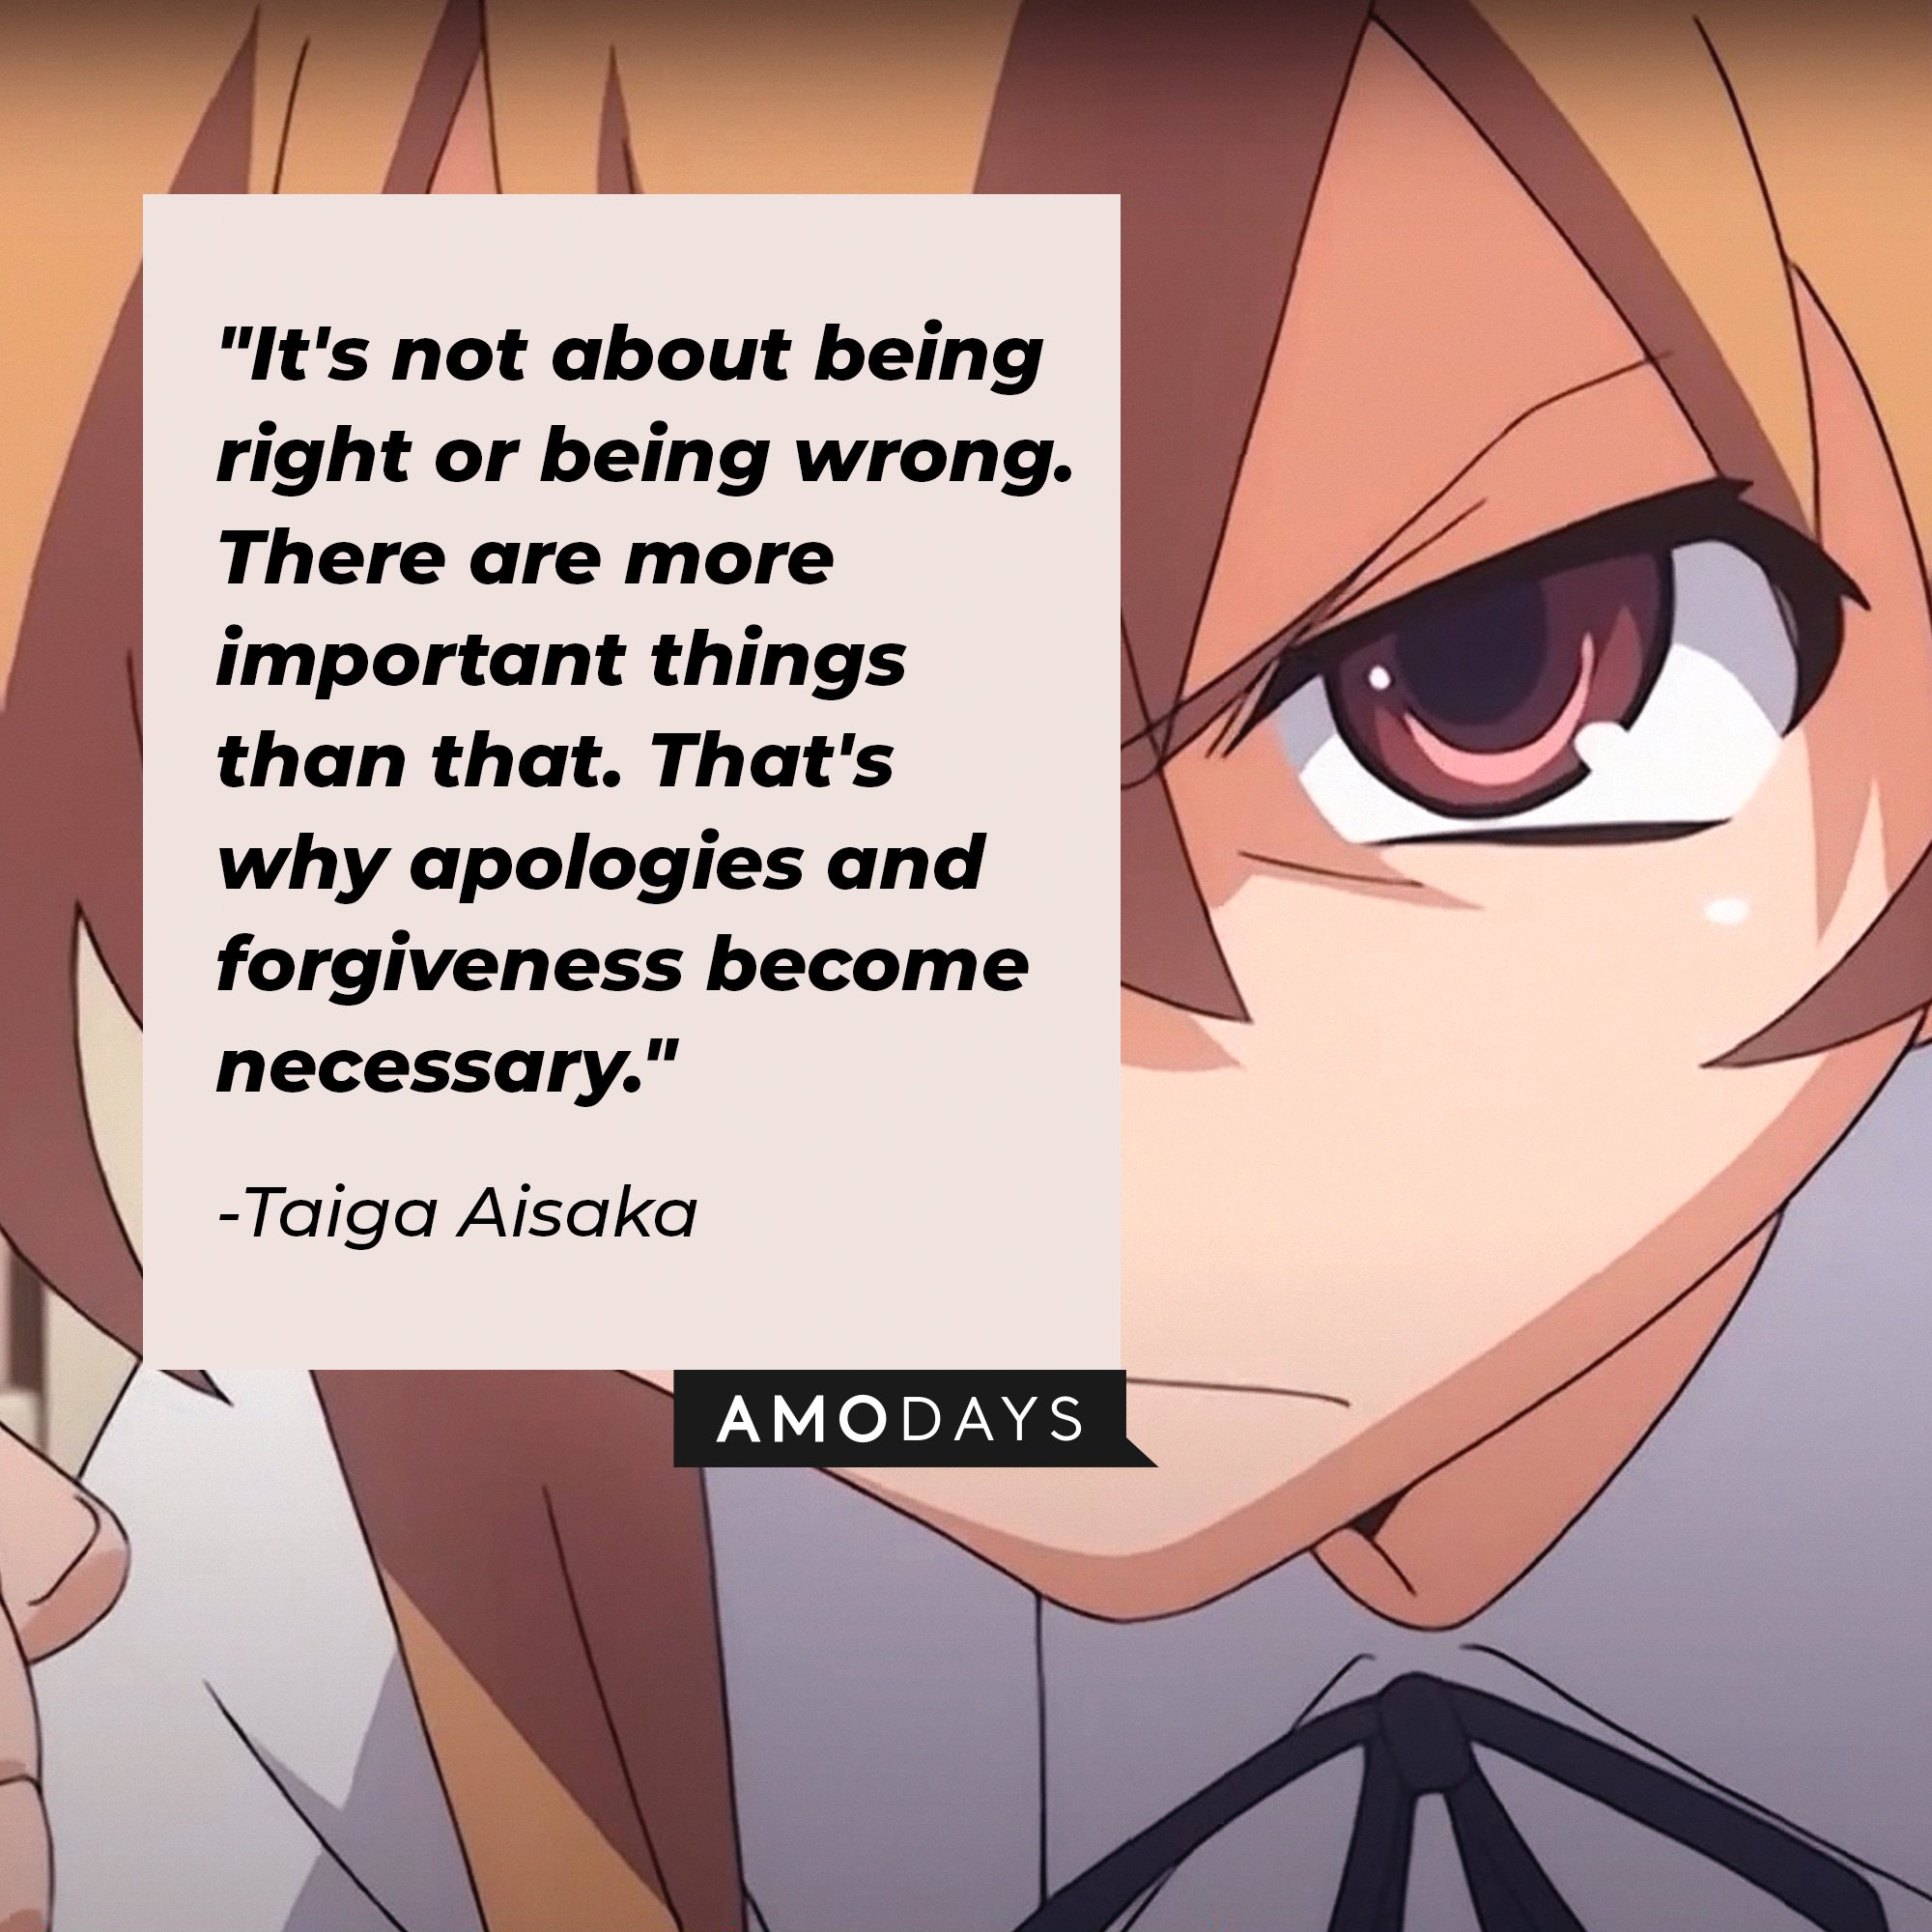 Taiga Aisaka’s quote: "It's not about being right or being wrong. There are more important things than that. That's why apologies and forgiveness become necessary." | Image: AmoDays